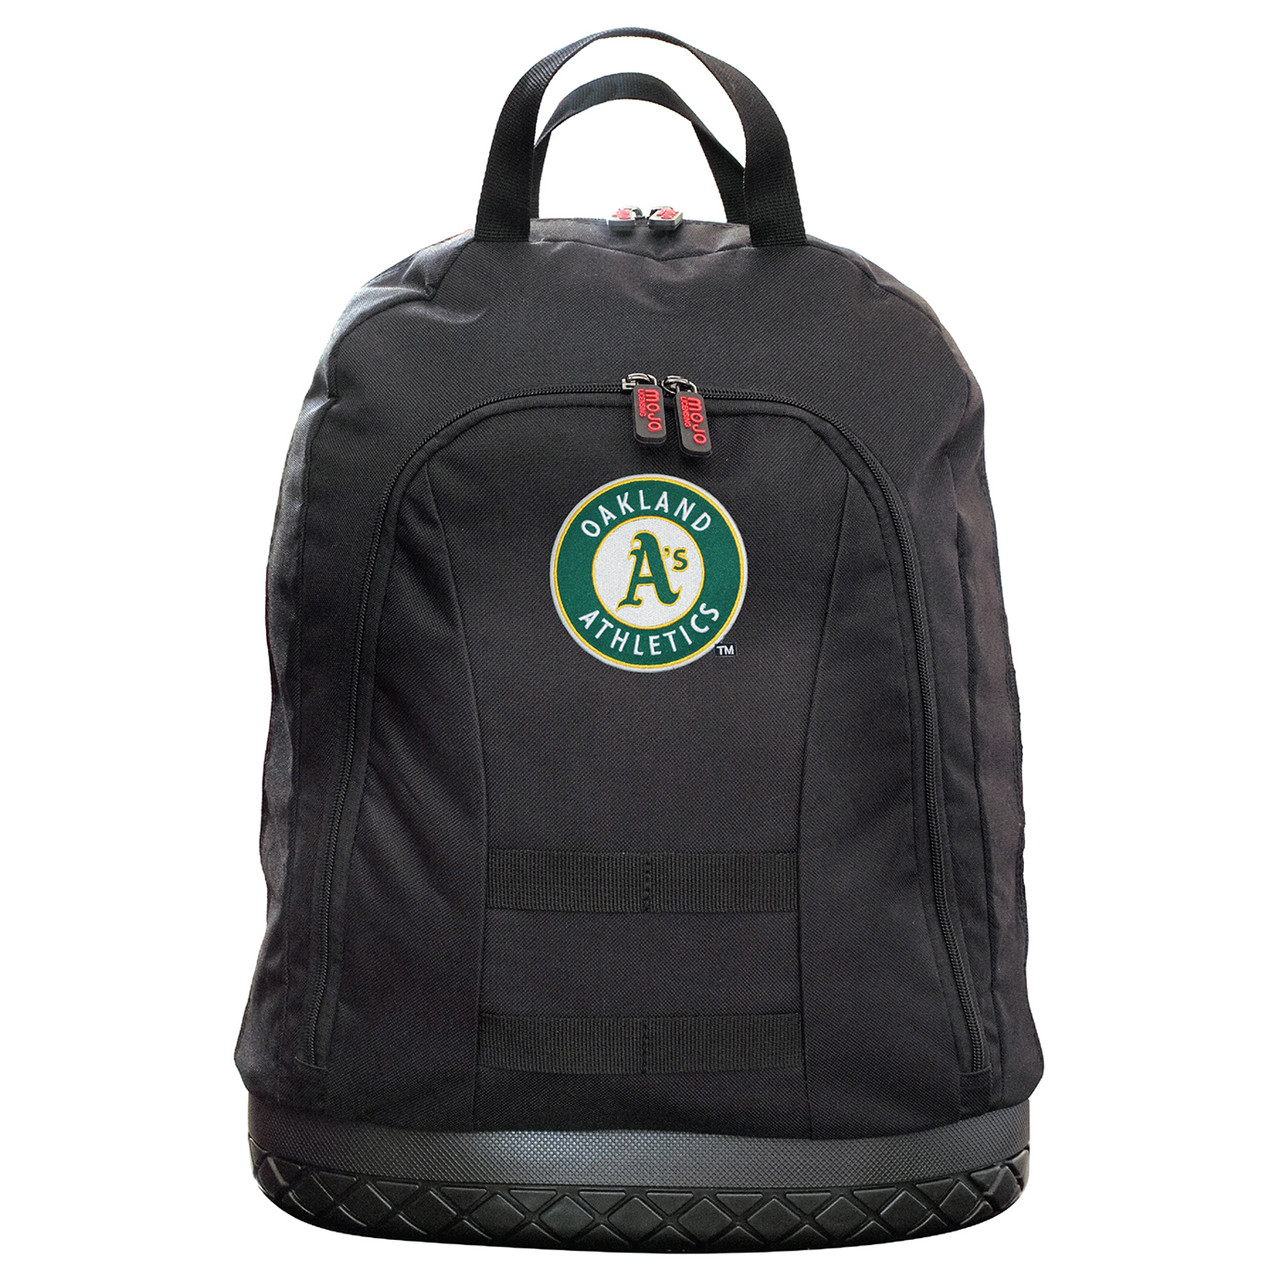 Oakland Athletics 18 in. Tool Bag Backpack